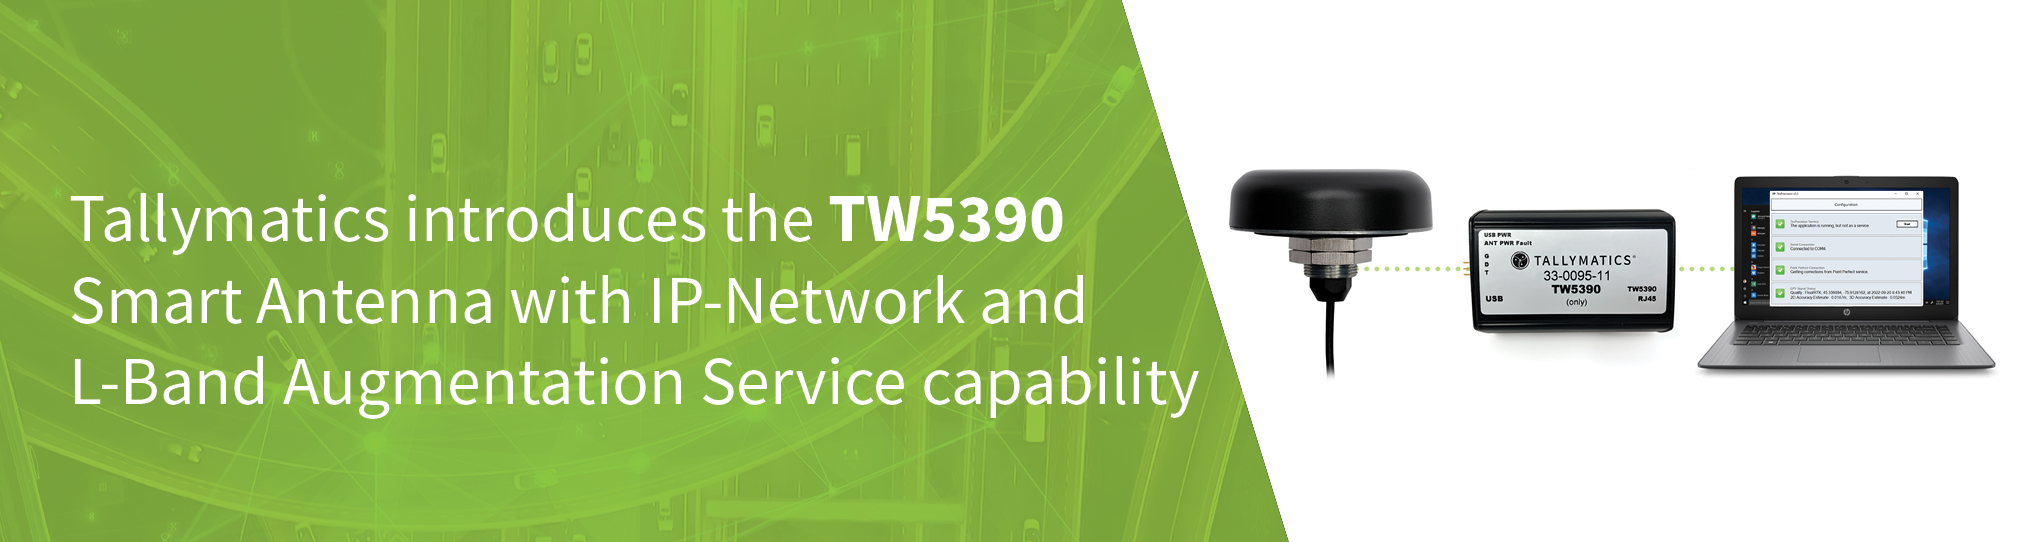 TALLYMATICS introduces the TW5390 Smart Antenna with IP-Network and L-Band Augmentation Service Capability